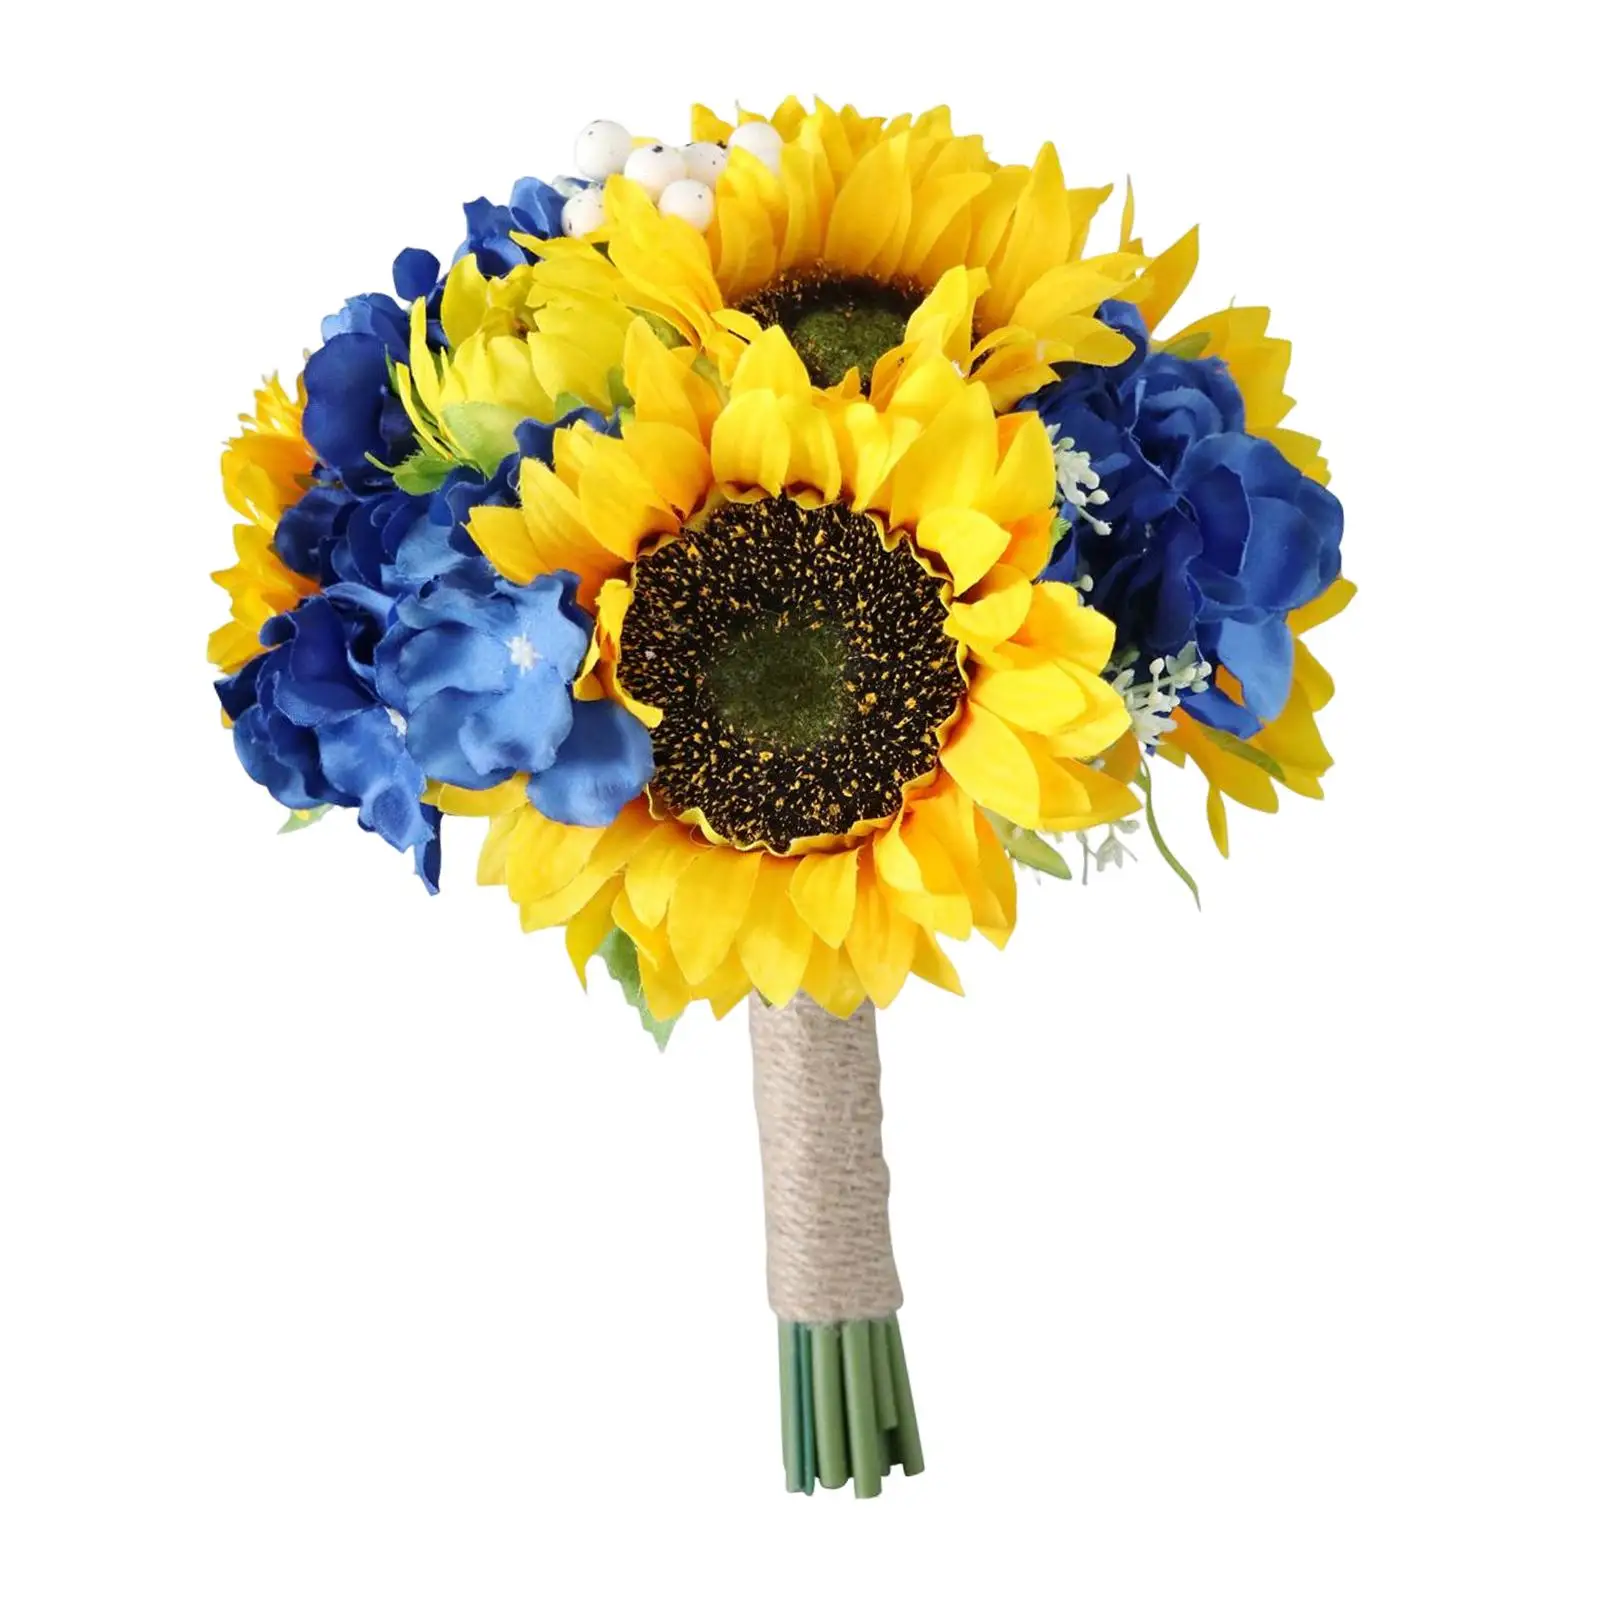 Artificial Wedding Bouquets Bridesmaid Bouquet with Linen Rope Sunflowers for Ceremony Home Decor Church Festival Decoration